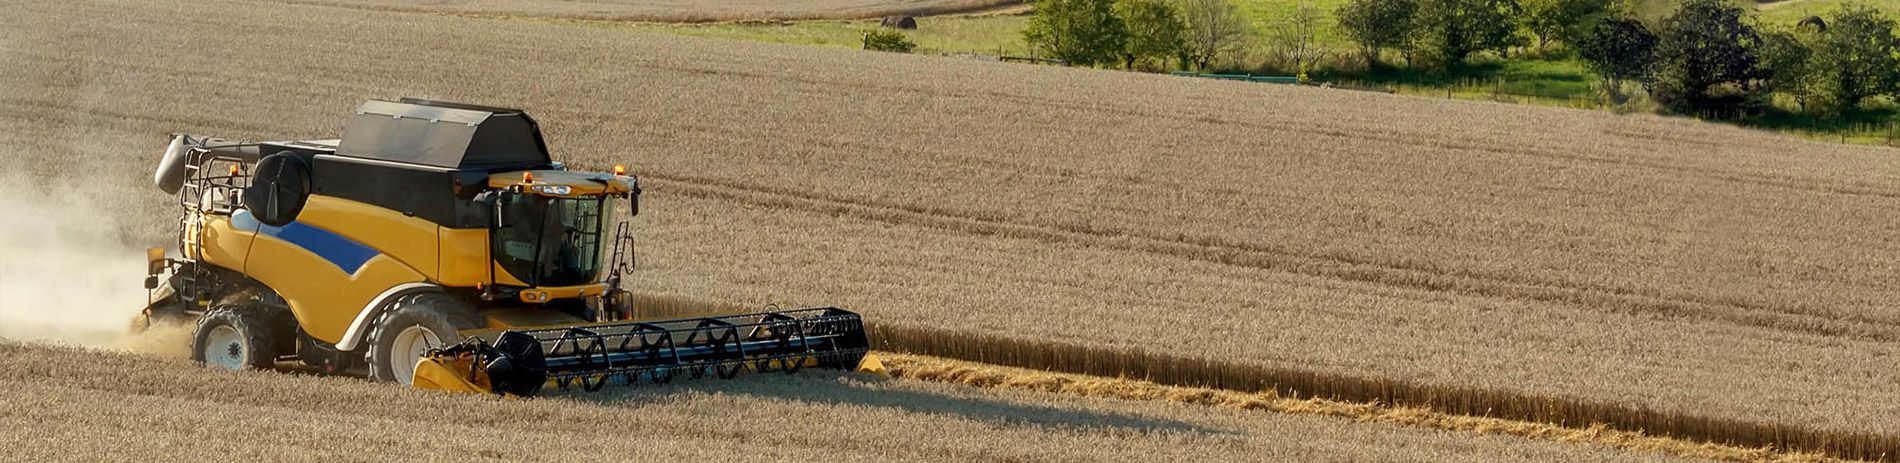 a yellow combine harvester is driving through a field of wheat .